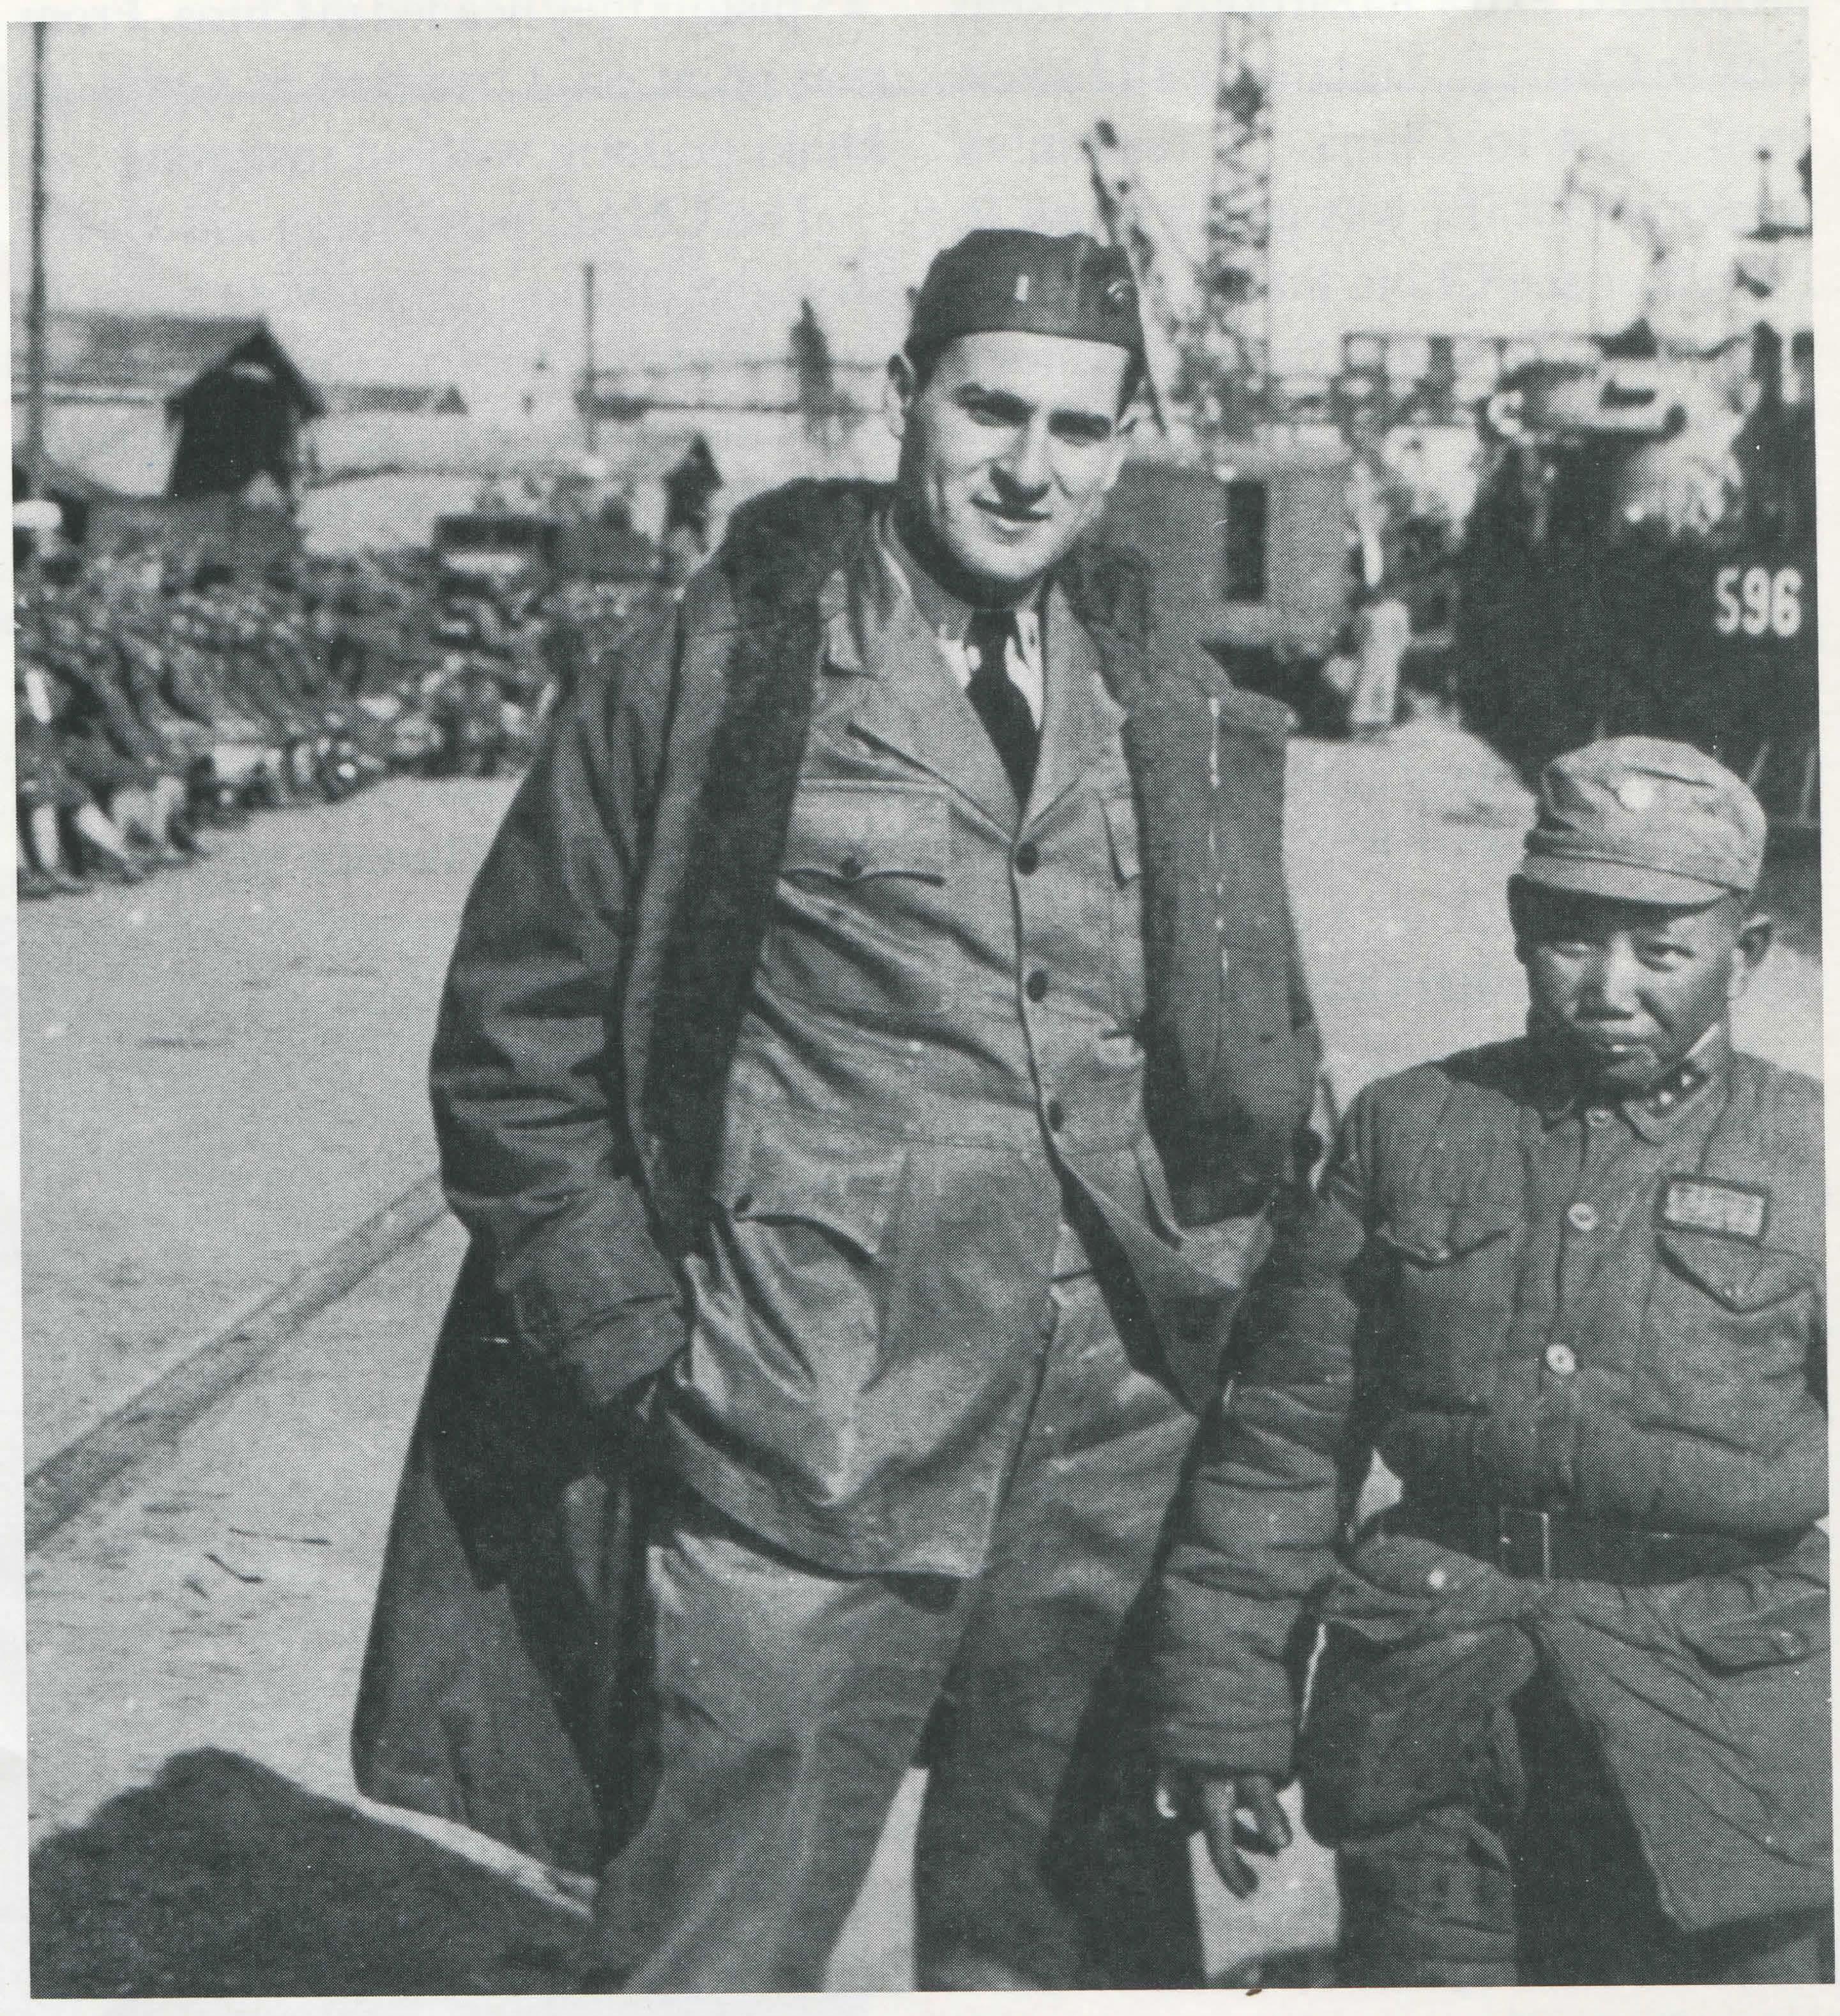 Dr. Heimlich and a Chinese soldier pose for a snapshot on the Shanghai waterfront